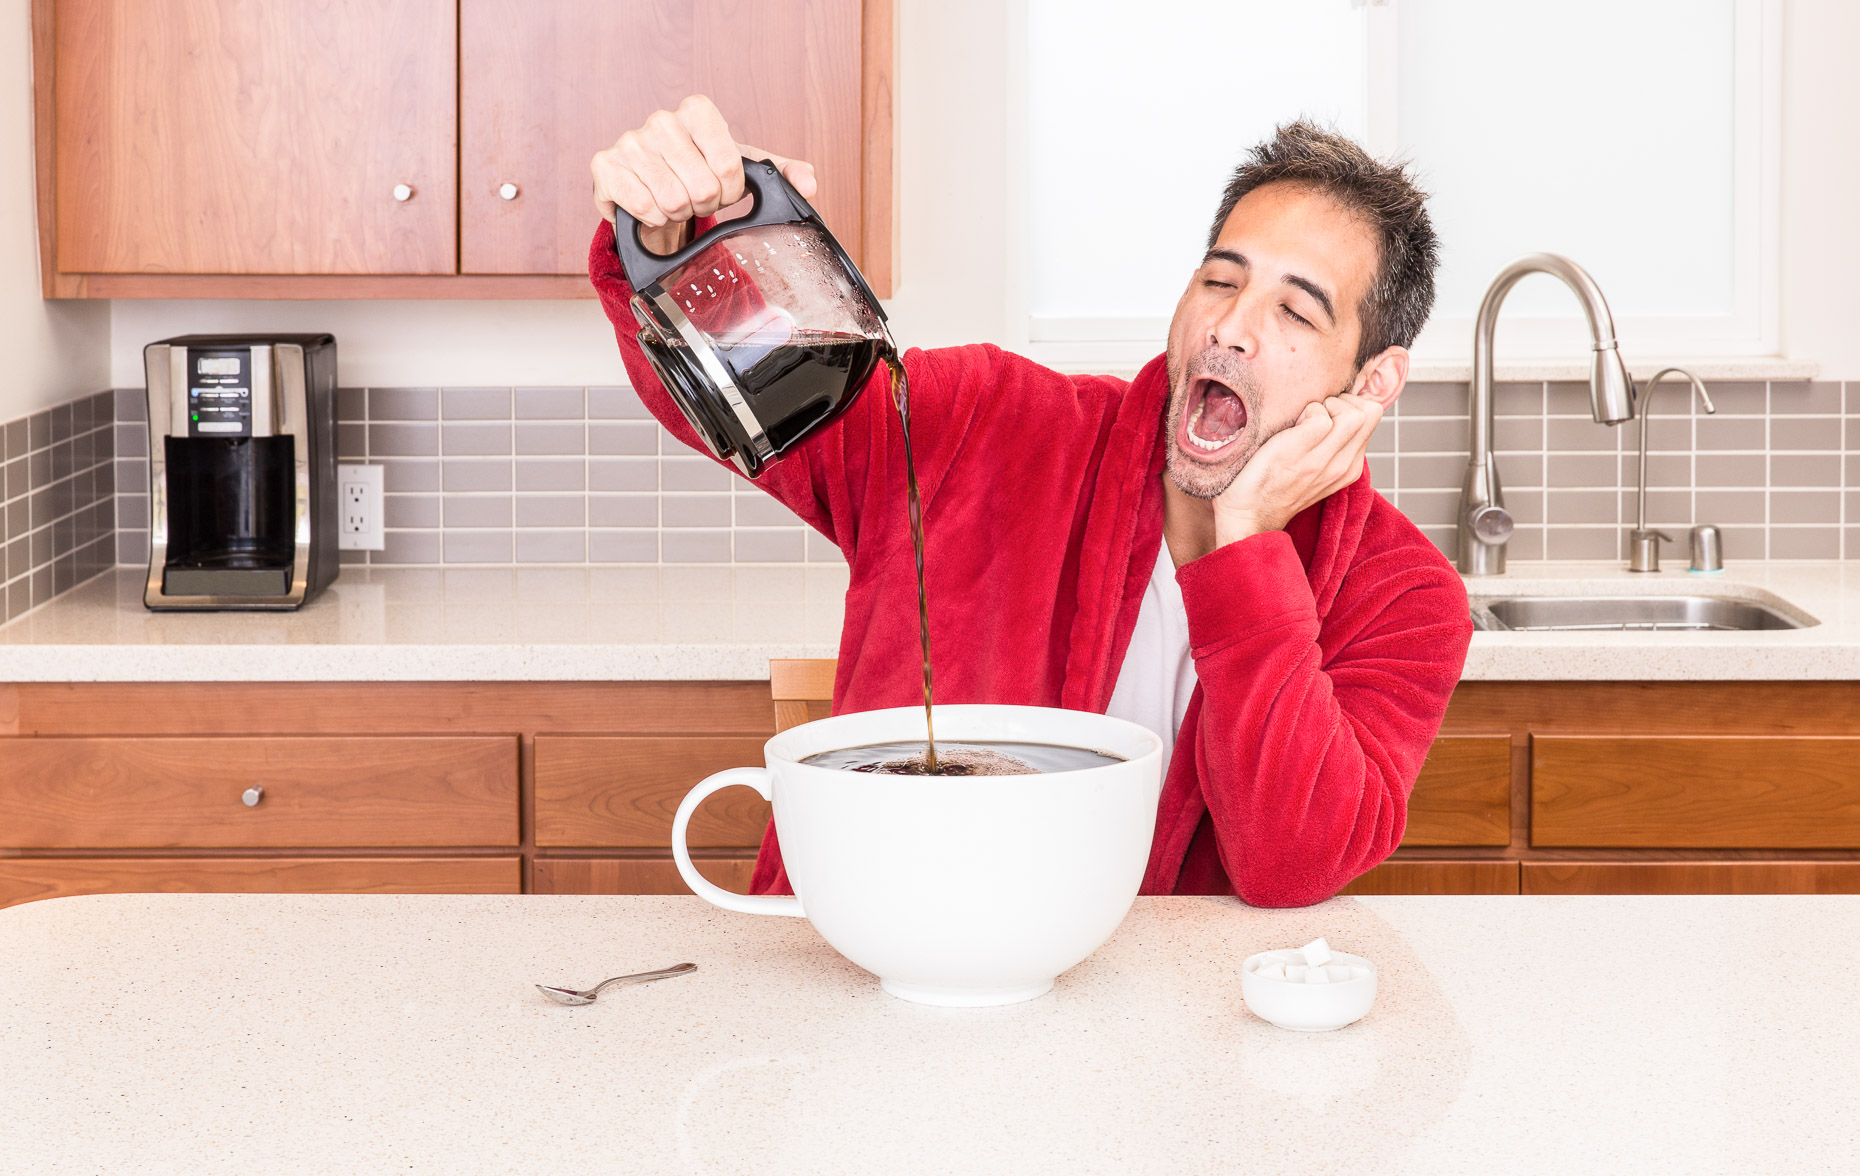 Sleepy tired man yawning in robe in kitchen pouring huge large cup of coffee. David Zaitz.